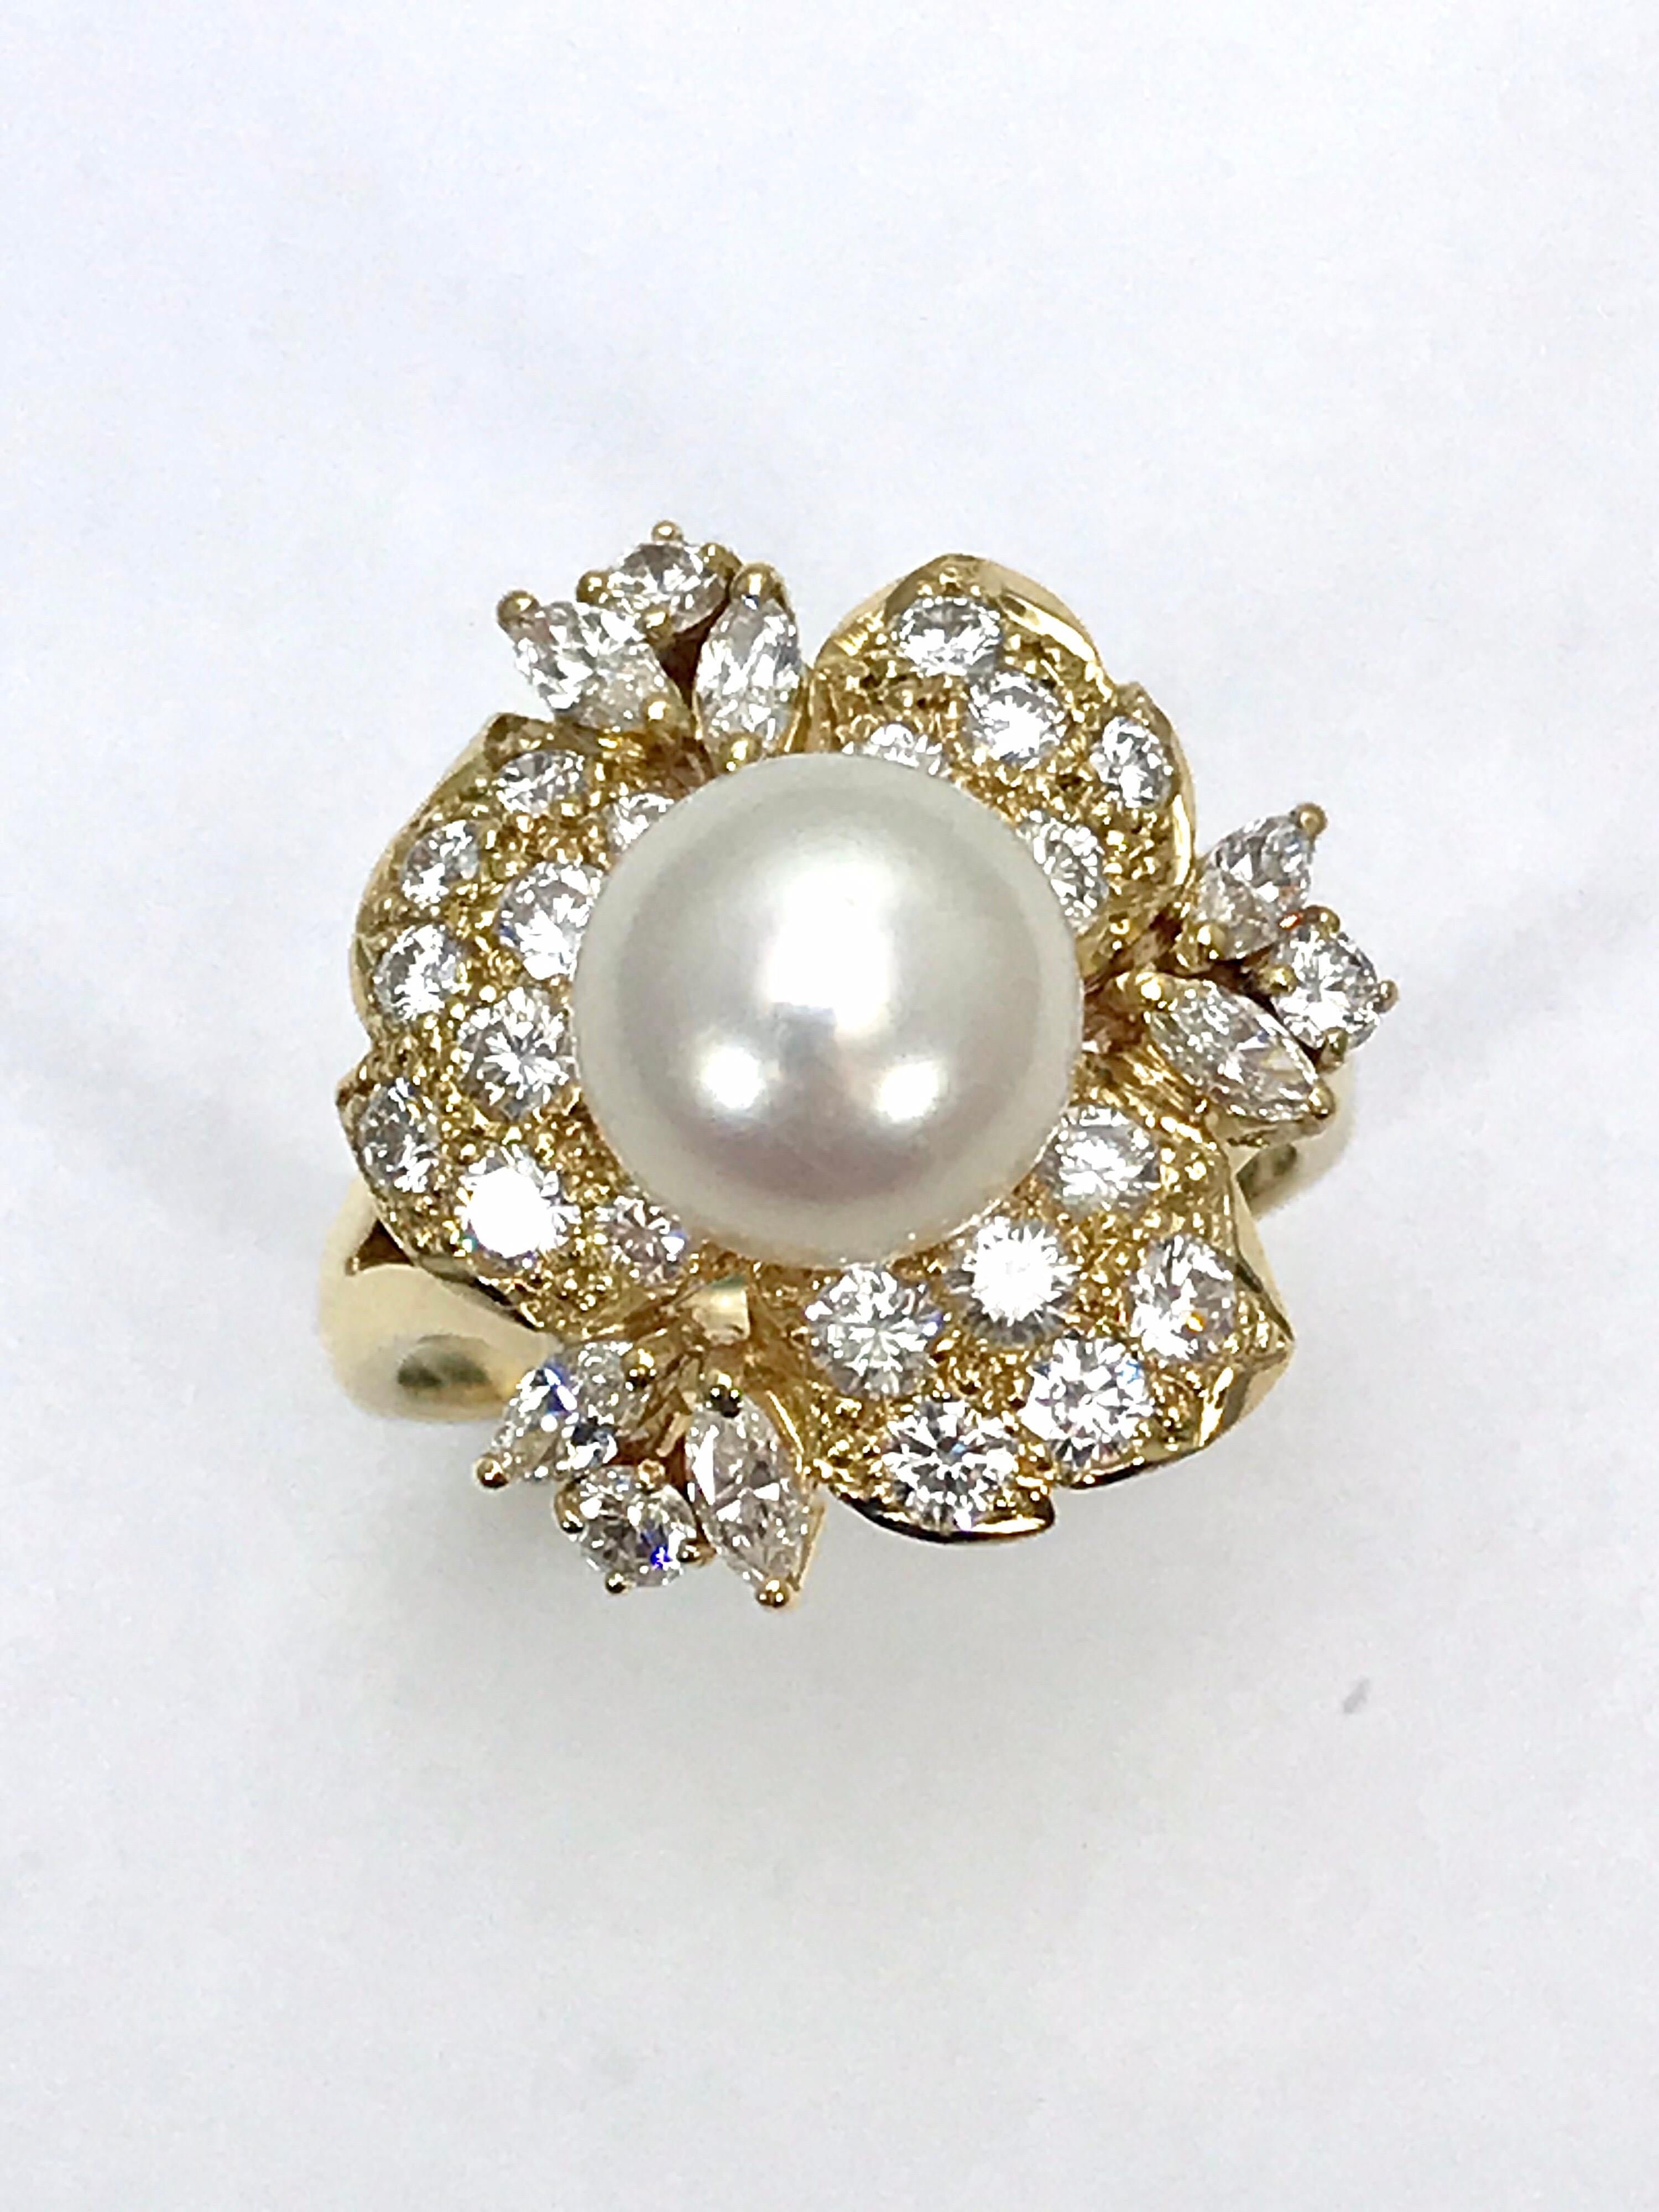 This is an elegantly ring.  Designed by Mikimoto, the 9.00 millimeter Cultured Pearl sits atop a floral Diamond cluster set in 18 karat yellow gold.  The Diamonds are made up of mainly round brilliant Diamonds, with six marquise shapes on the outer